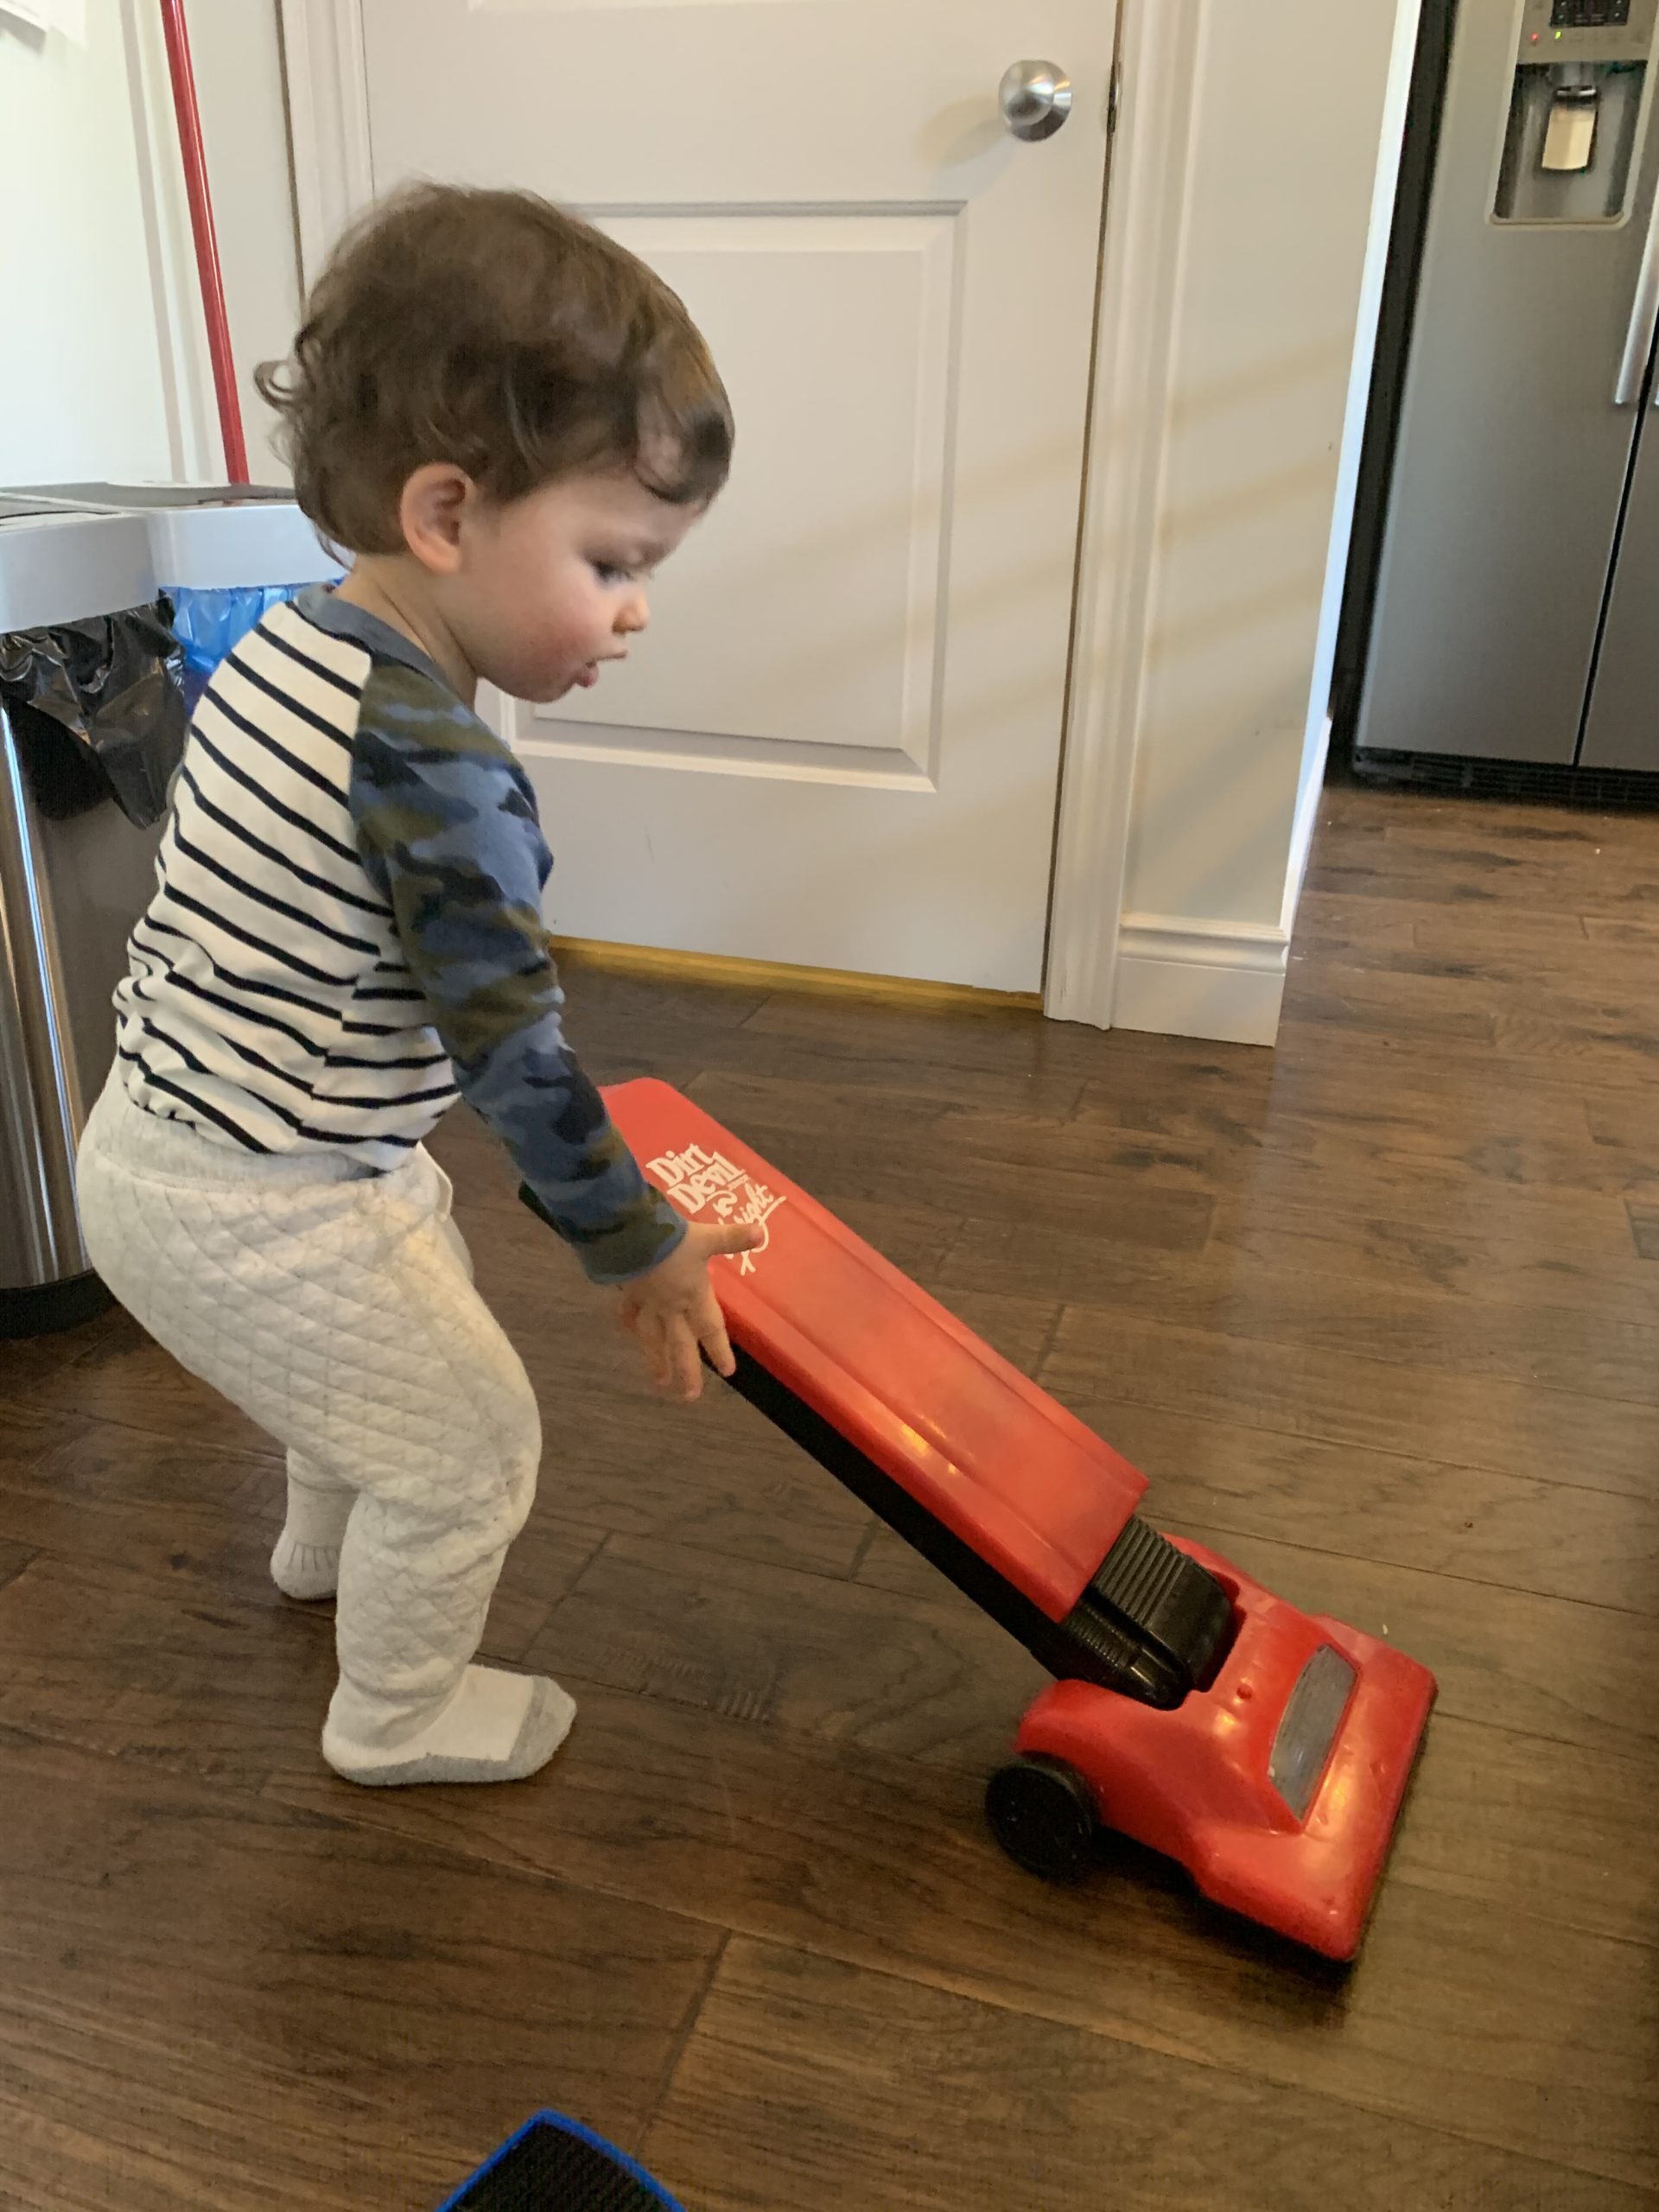 Toddler boy playing with a toy vacuum.